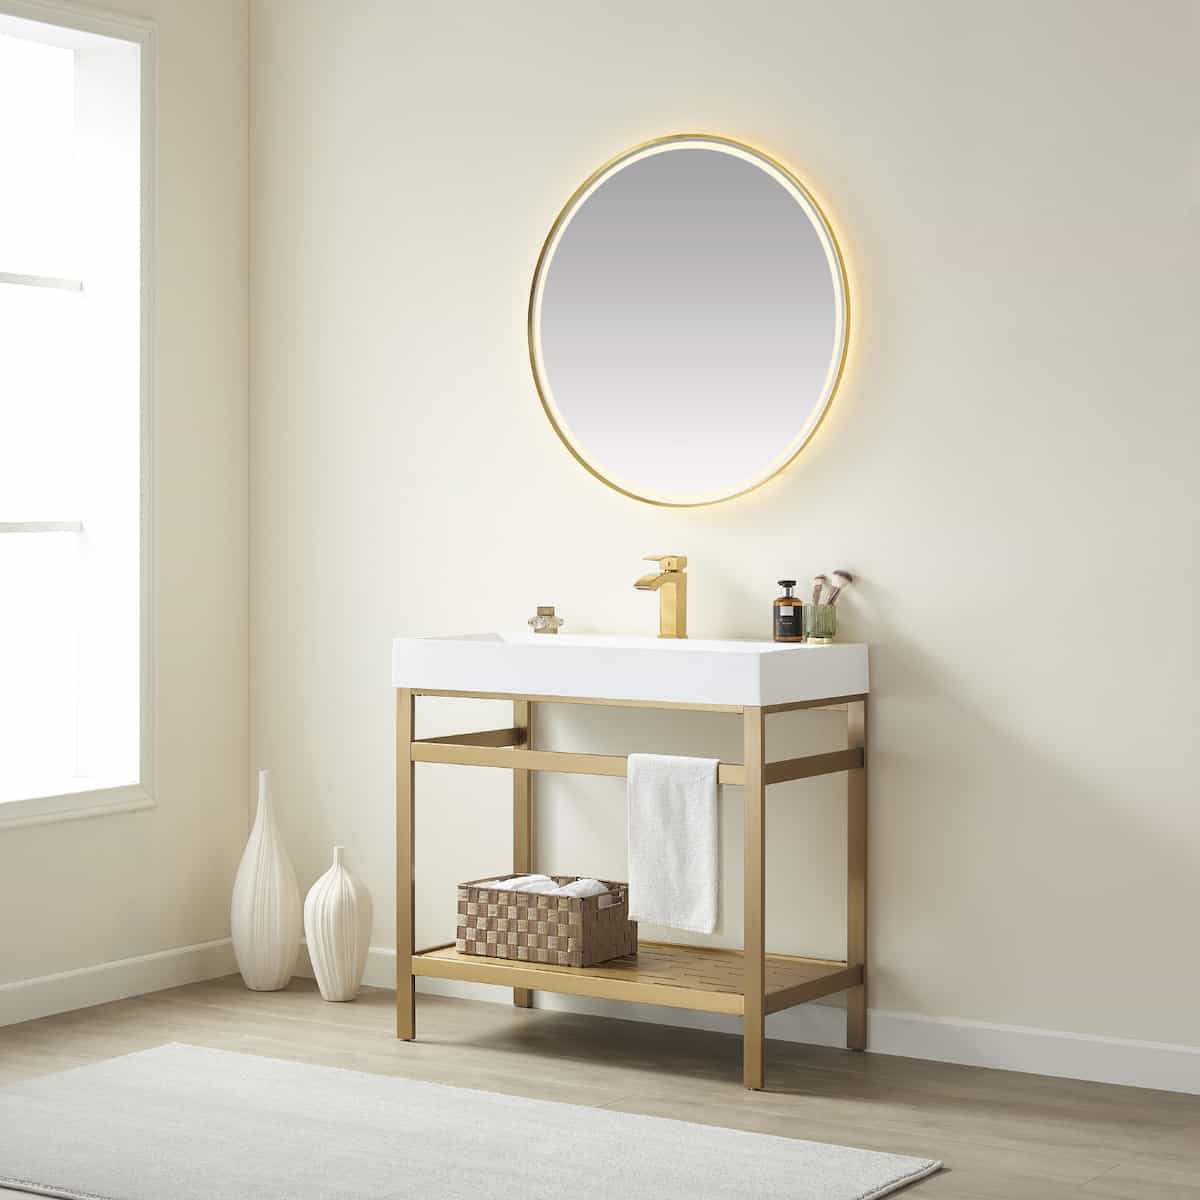 Vinnova Soria 36 Inch Freestanding Single Sink Bath Vanity in Brushed Gold Metal Support with White One-Piece Composite Stone Sink Top With Mirror Side 702636-BG-WH #mirror_with mirror